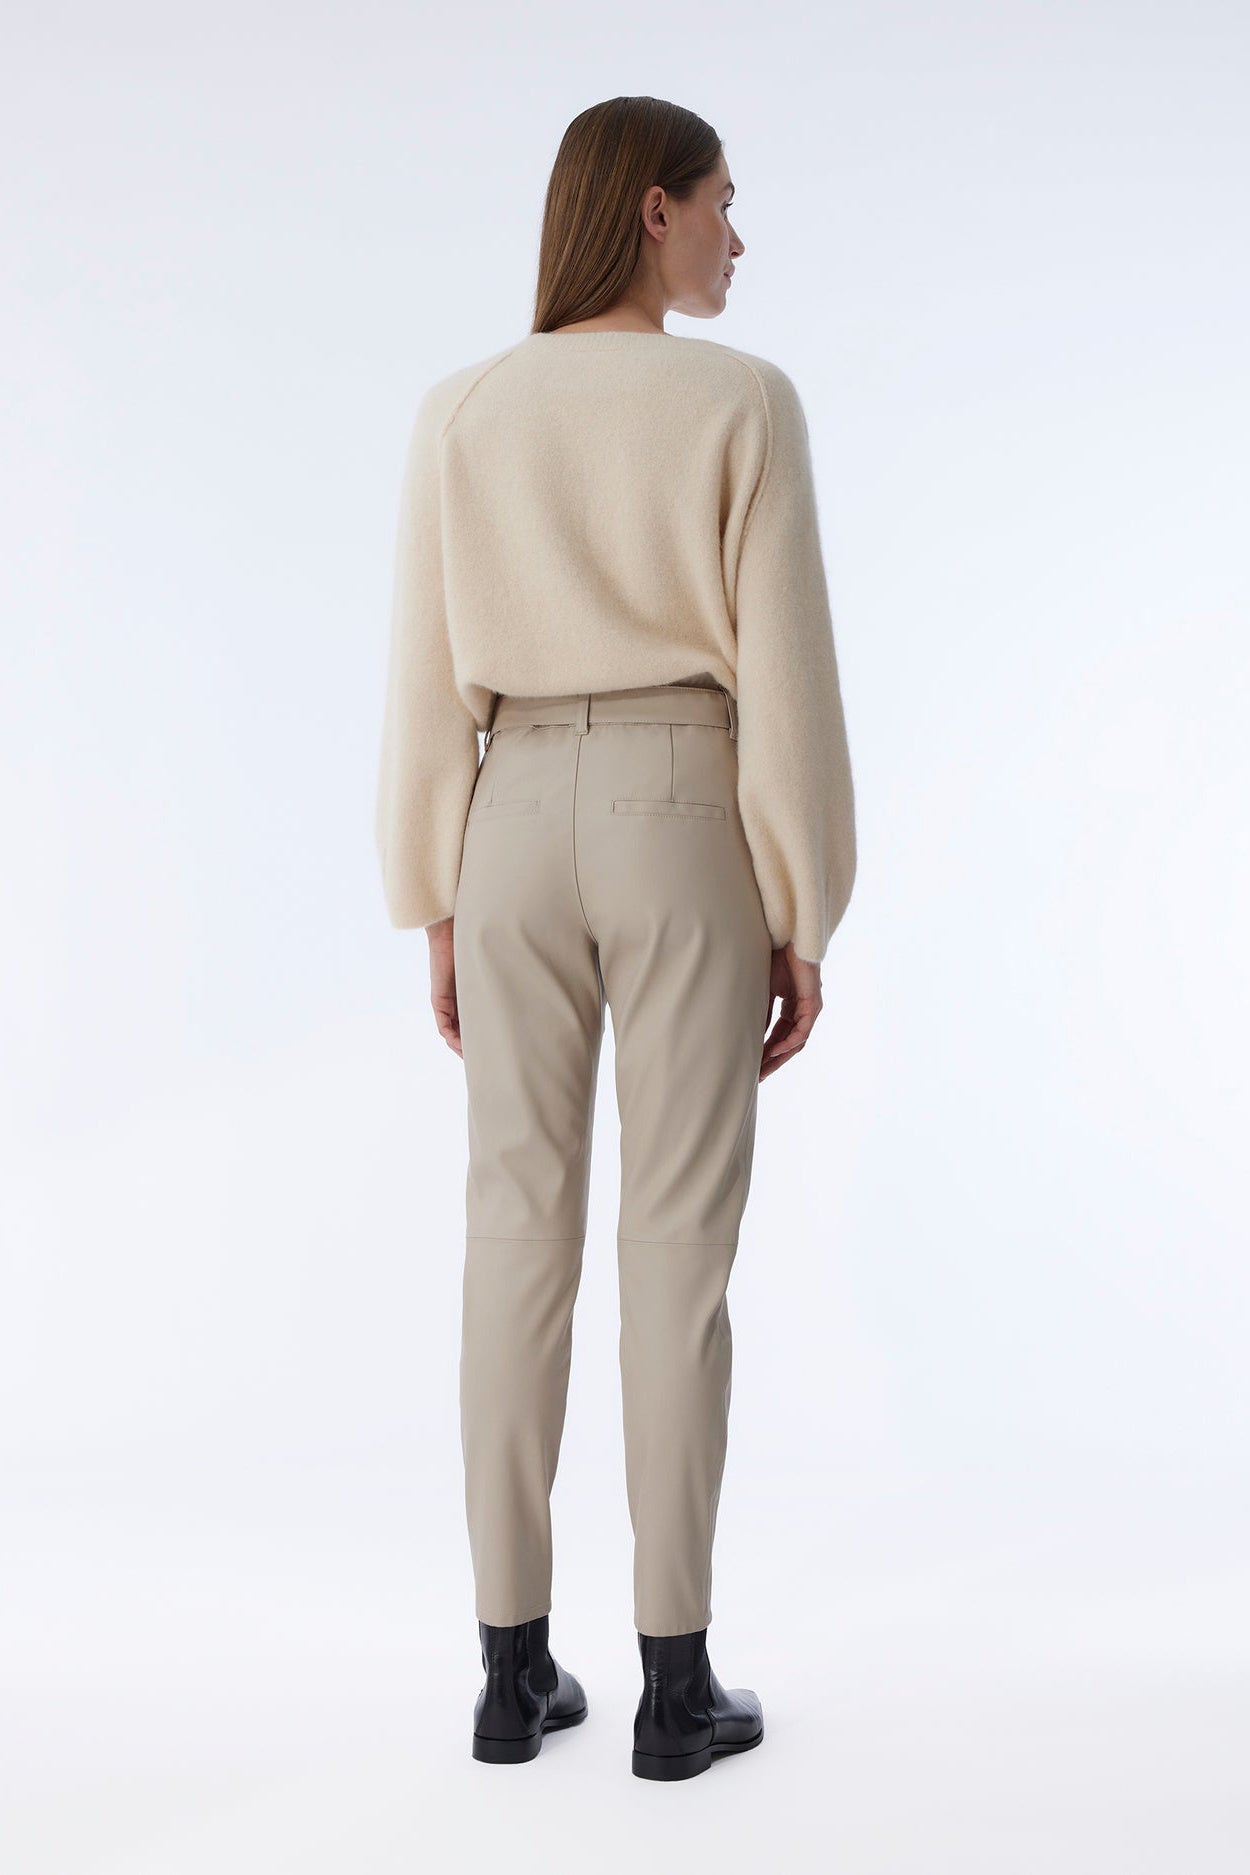 Knit-ted Francis Pant - Sand - RUM Amsterdam